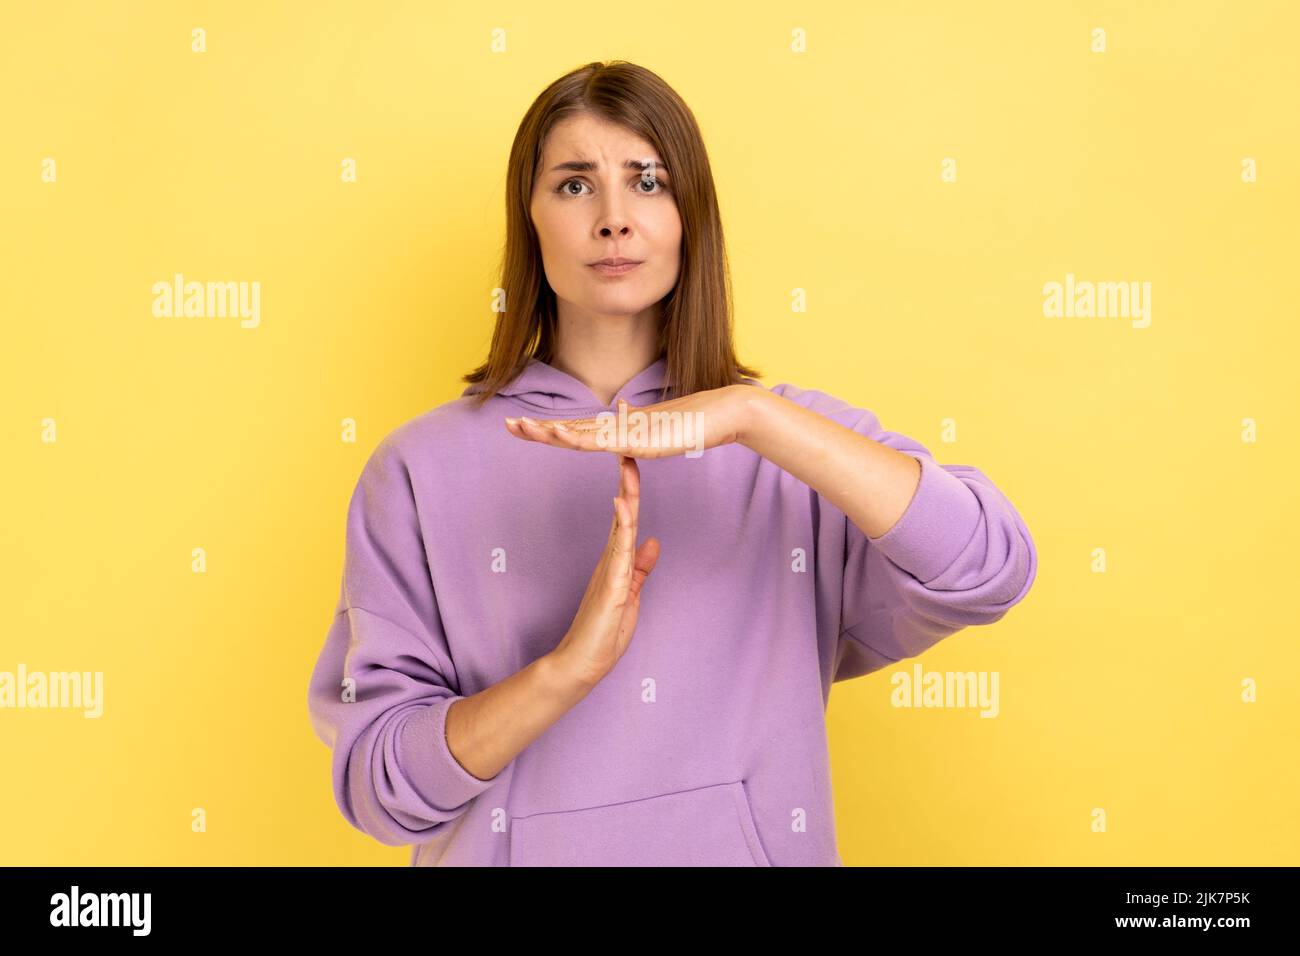 I need more time. Portrait of displeased woman showing time out hand gesture, looking imploringly, worried about deadline, wearing purple hoodie. Indoor studio shot isolated on yellow background. Stock Photo